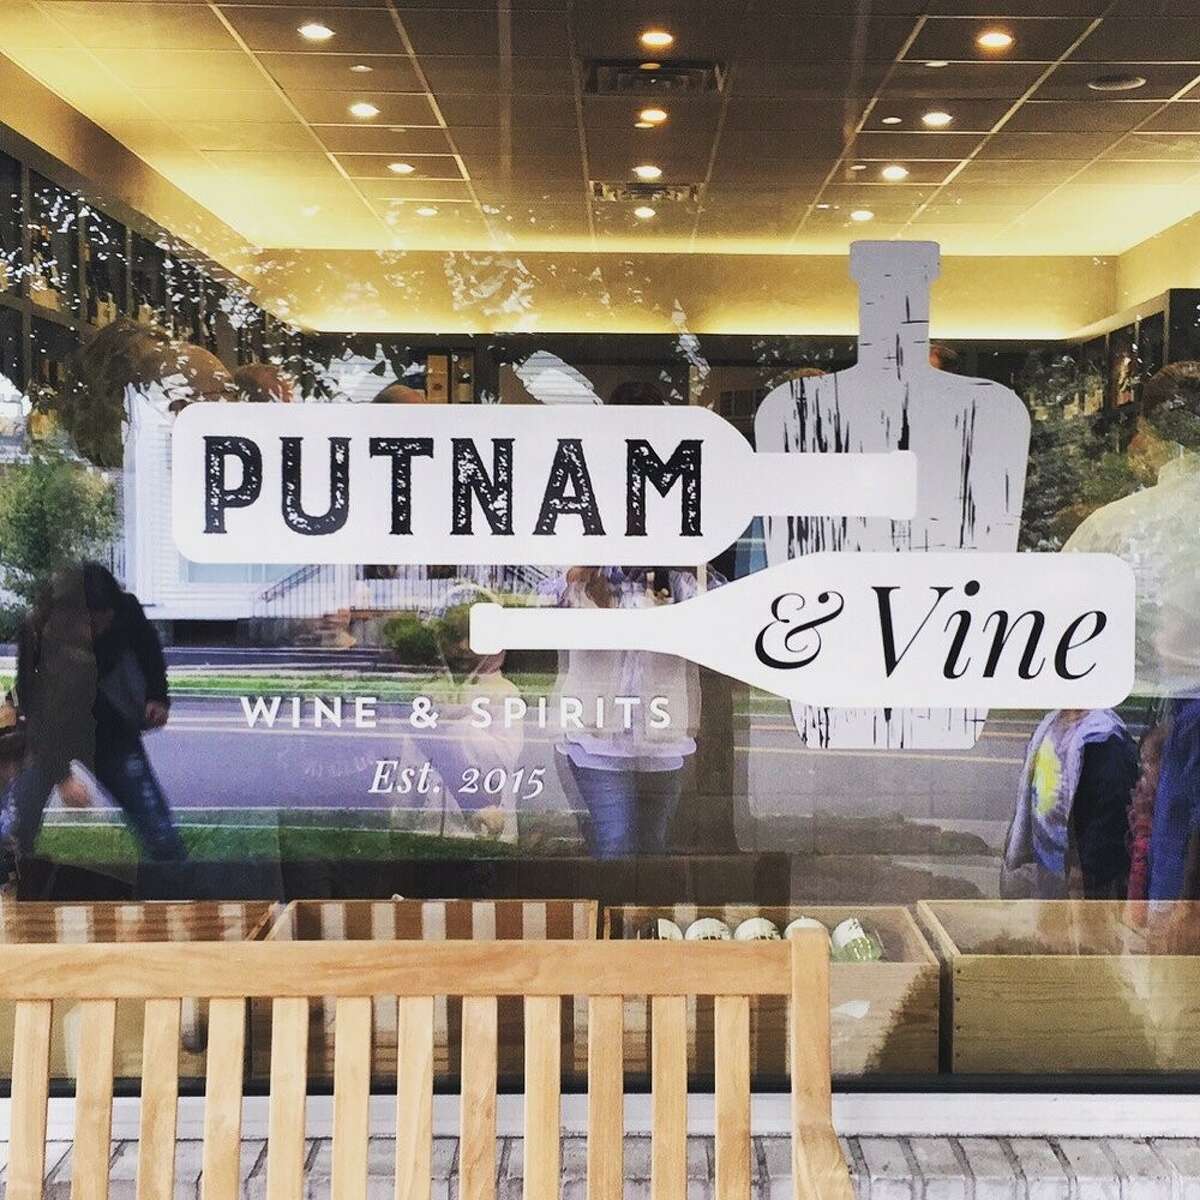 Putnam & Vine — Greenwich  Customers can place their orders at: Email: info@putnamandvine.com; Text: (425) 765-6151; Phone: (203) 869-6008. Find out more. Hours: Monday - Saturday 11 a.m. - 7 p.m.; Sunday 12 p.m. - 5 p.m.